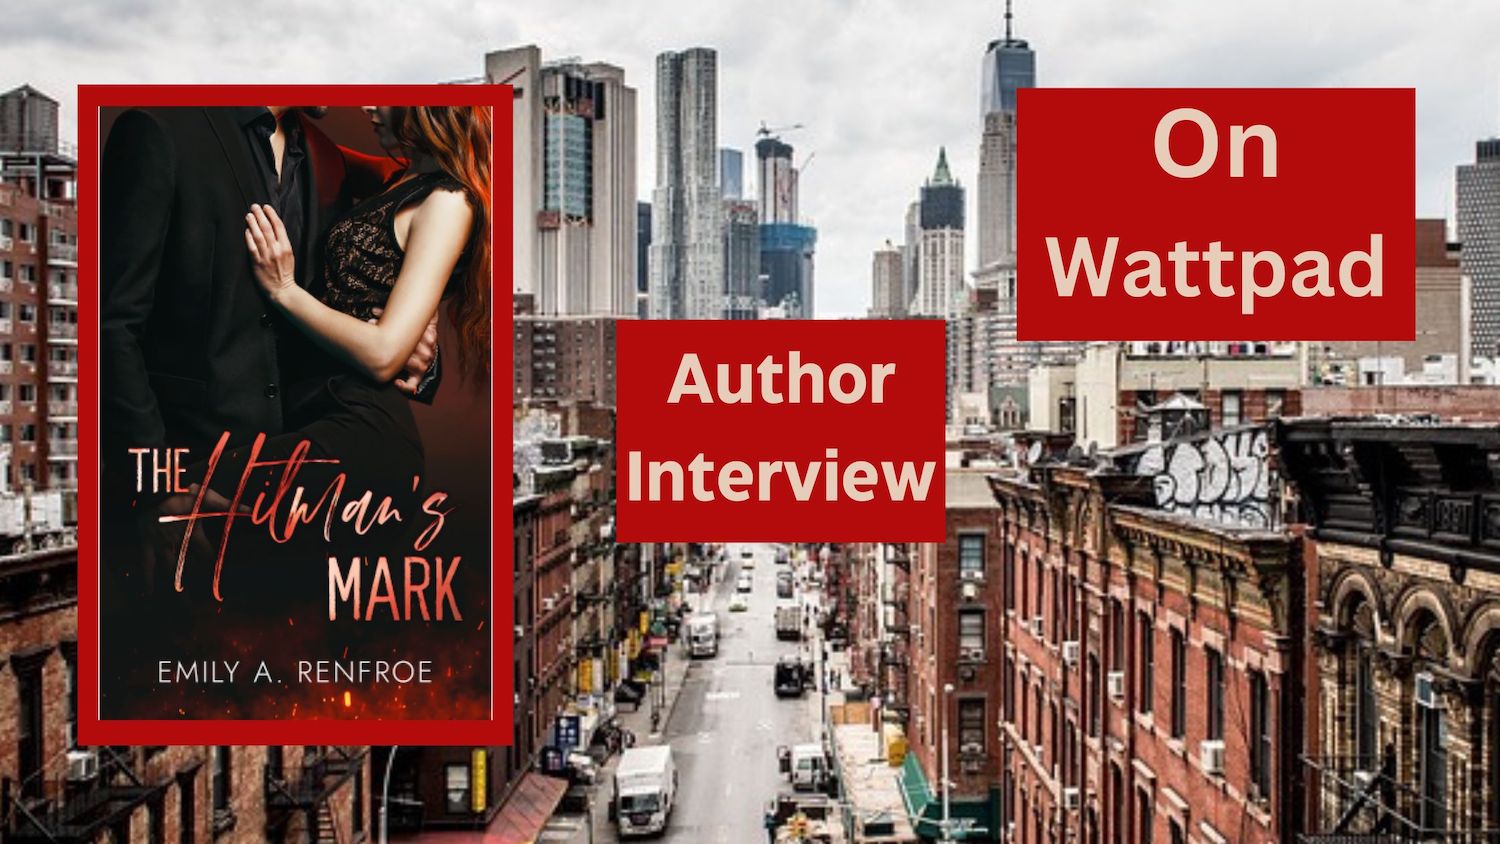 You are currently viewing The Hitman’s Mark: Wattpad